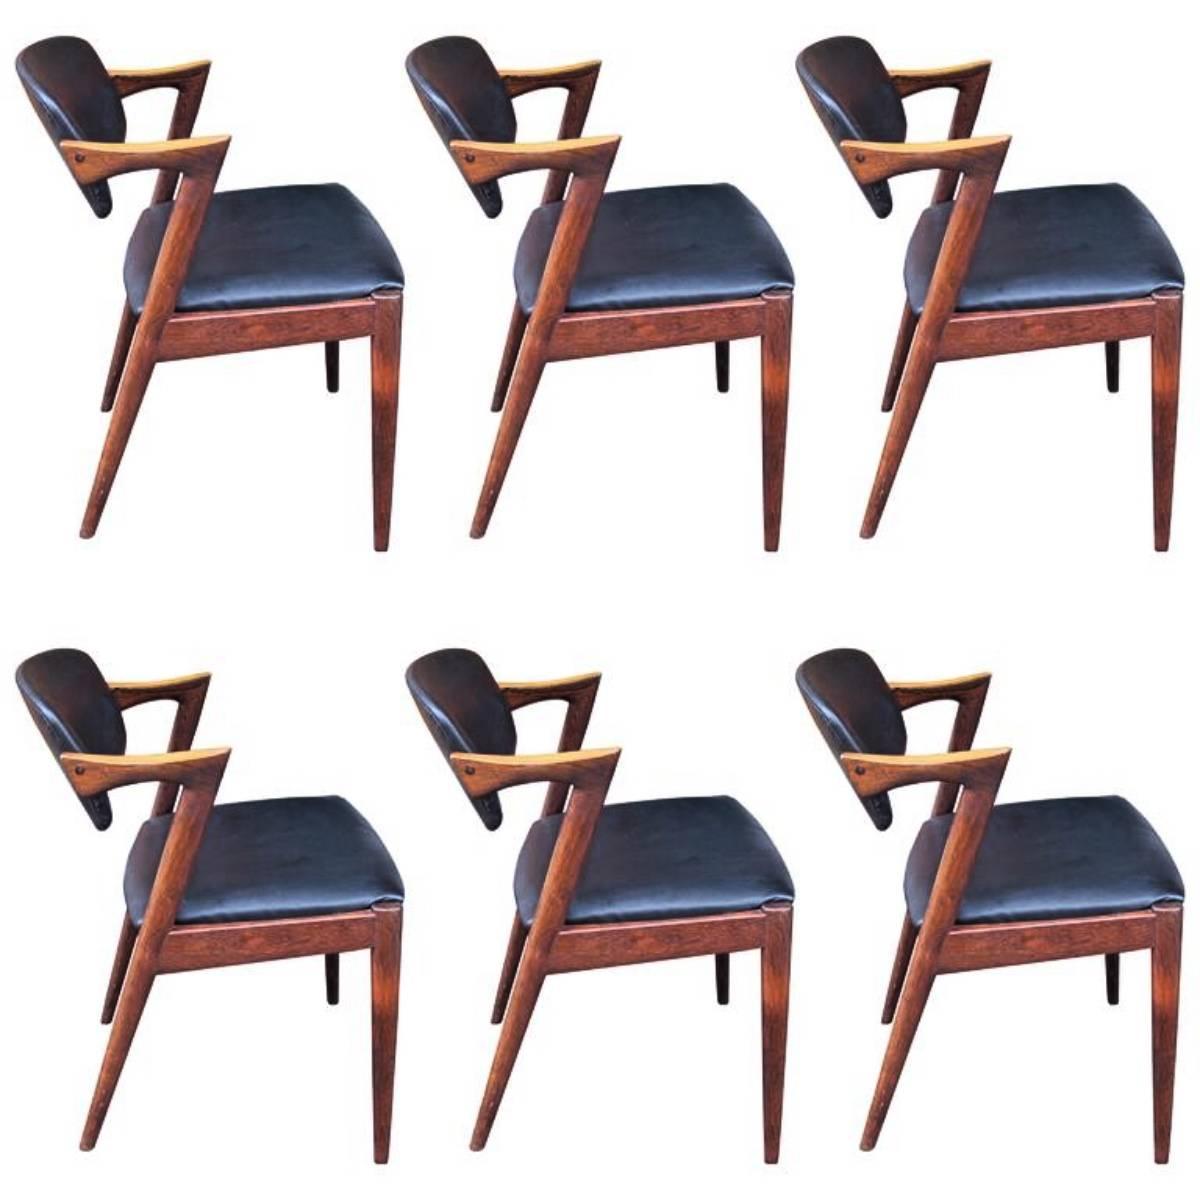 12 Kai Kristiansen chairs Model 42 in Rosewood CUSTOM UPHOLSTERY AVAILABLE For Sale